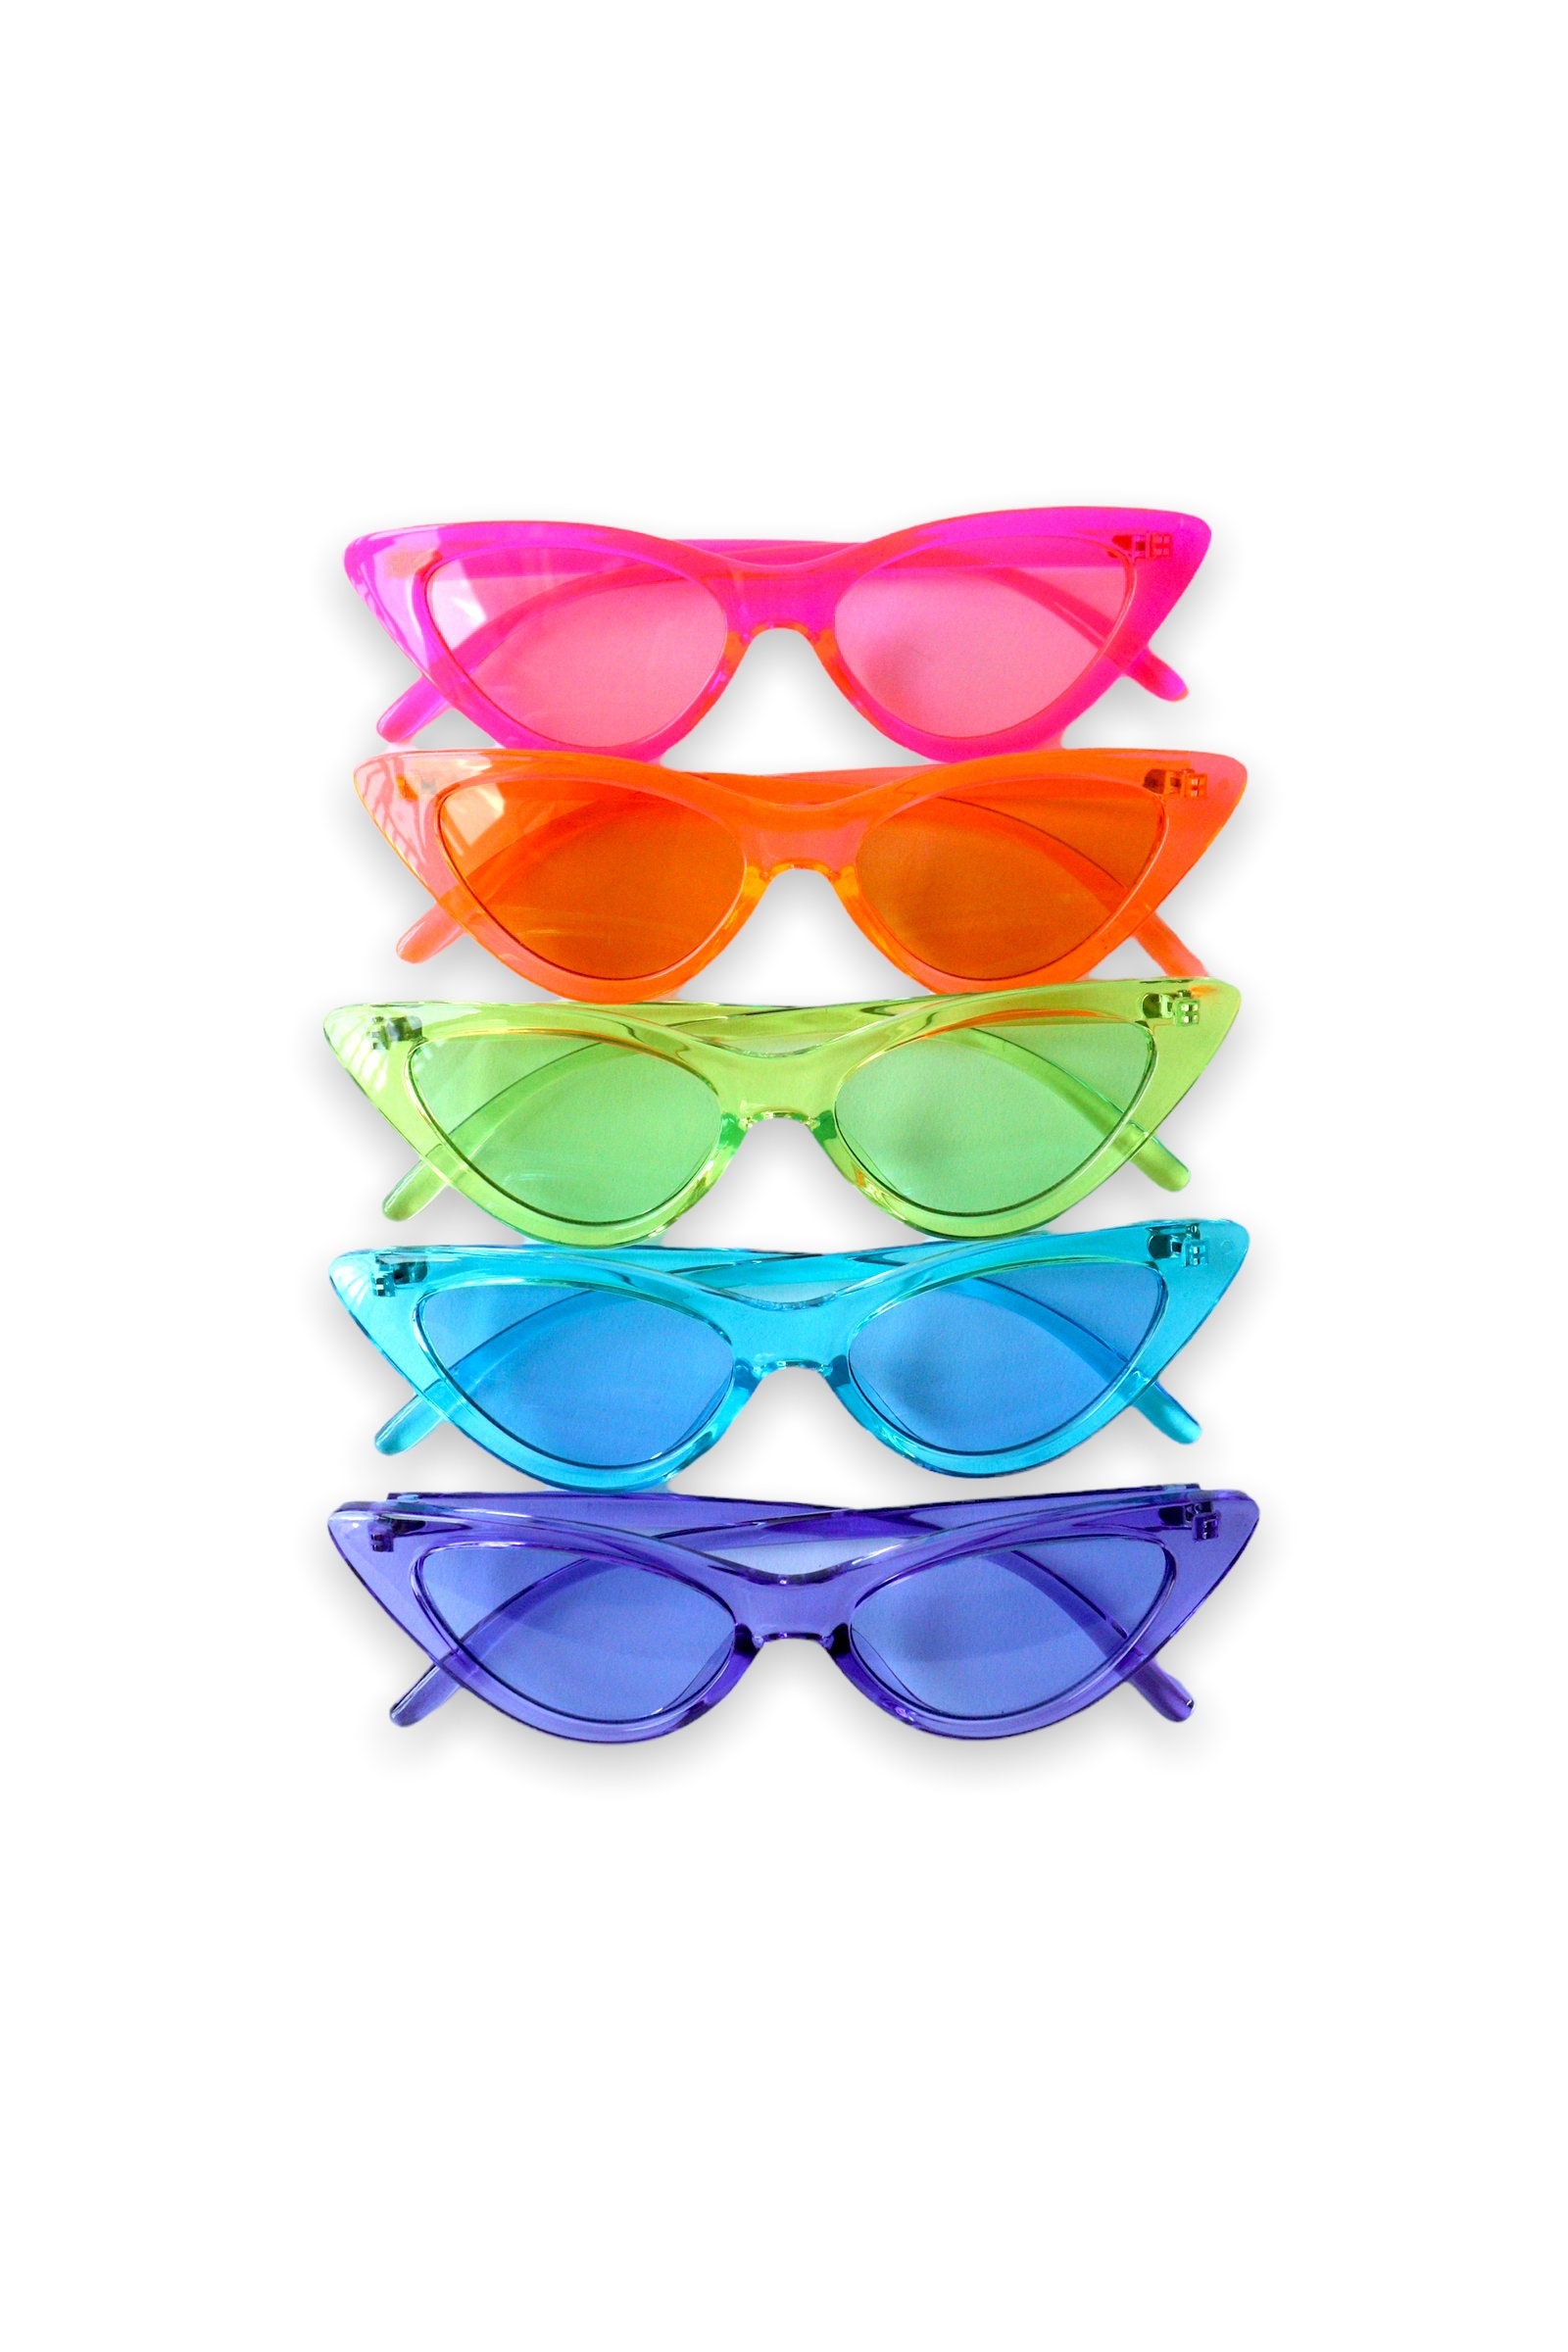  Funny Party Hats Neon Sunglasses- 36 Pack - Bulk Sunglasses -  Party Glasses - Pool Party - Beach Party Favors : Home & Kitchen